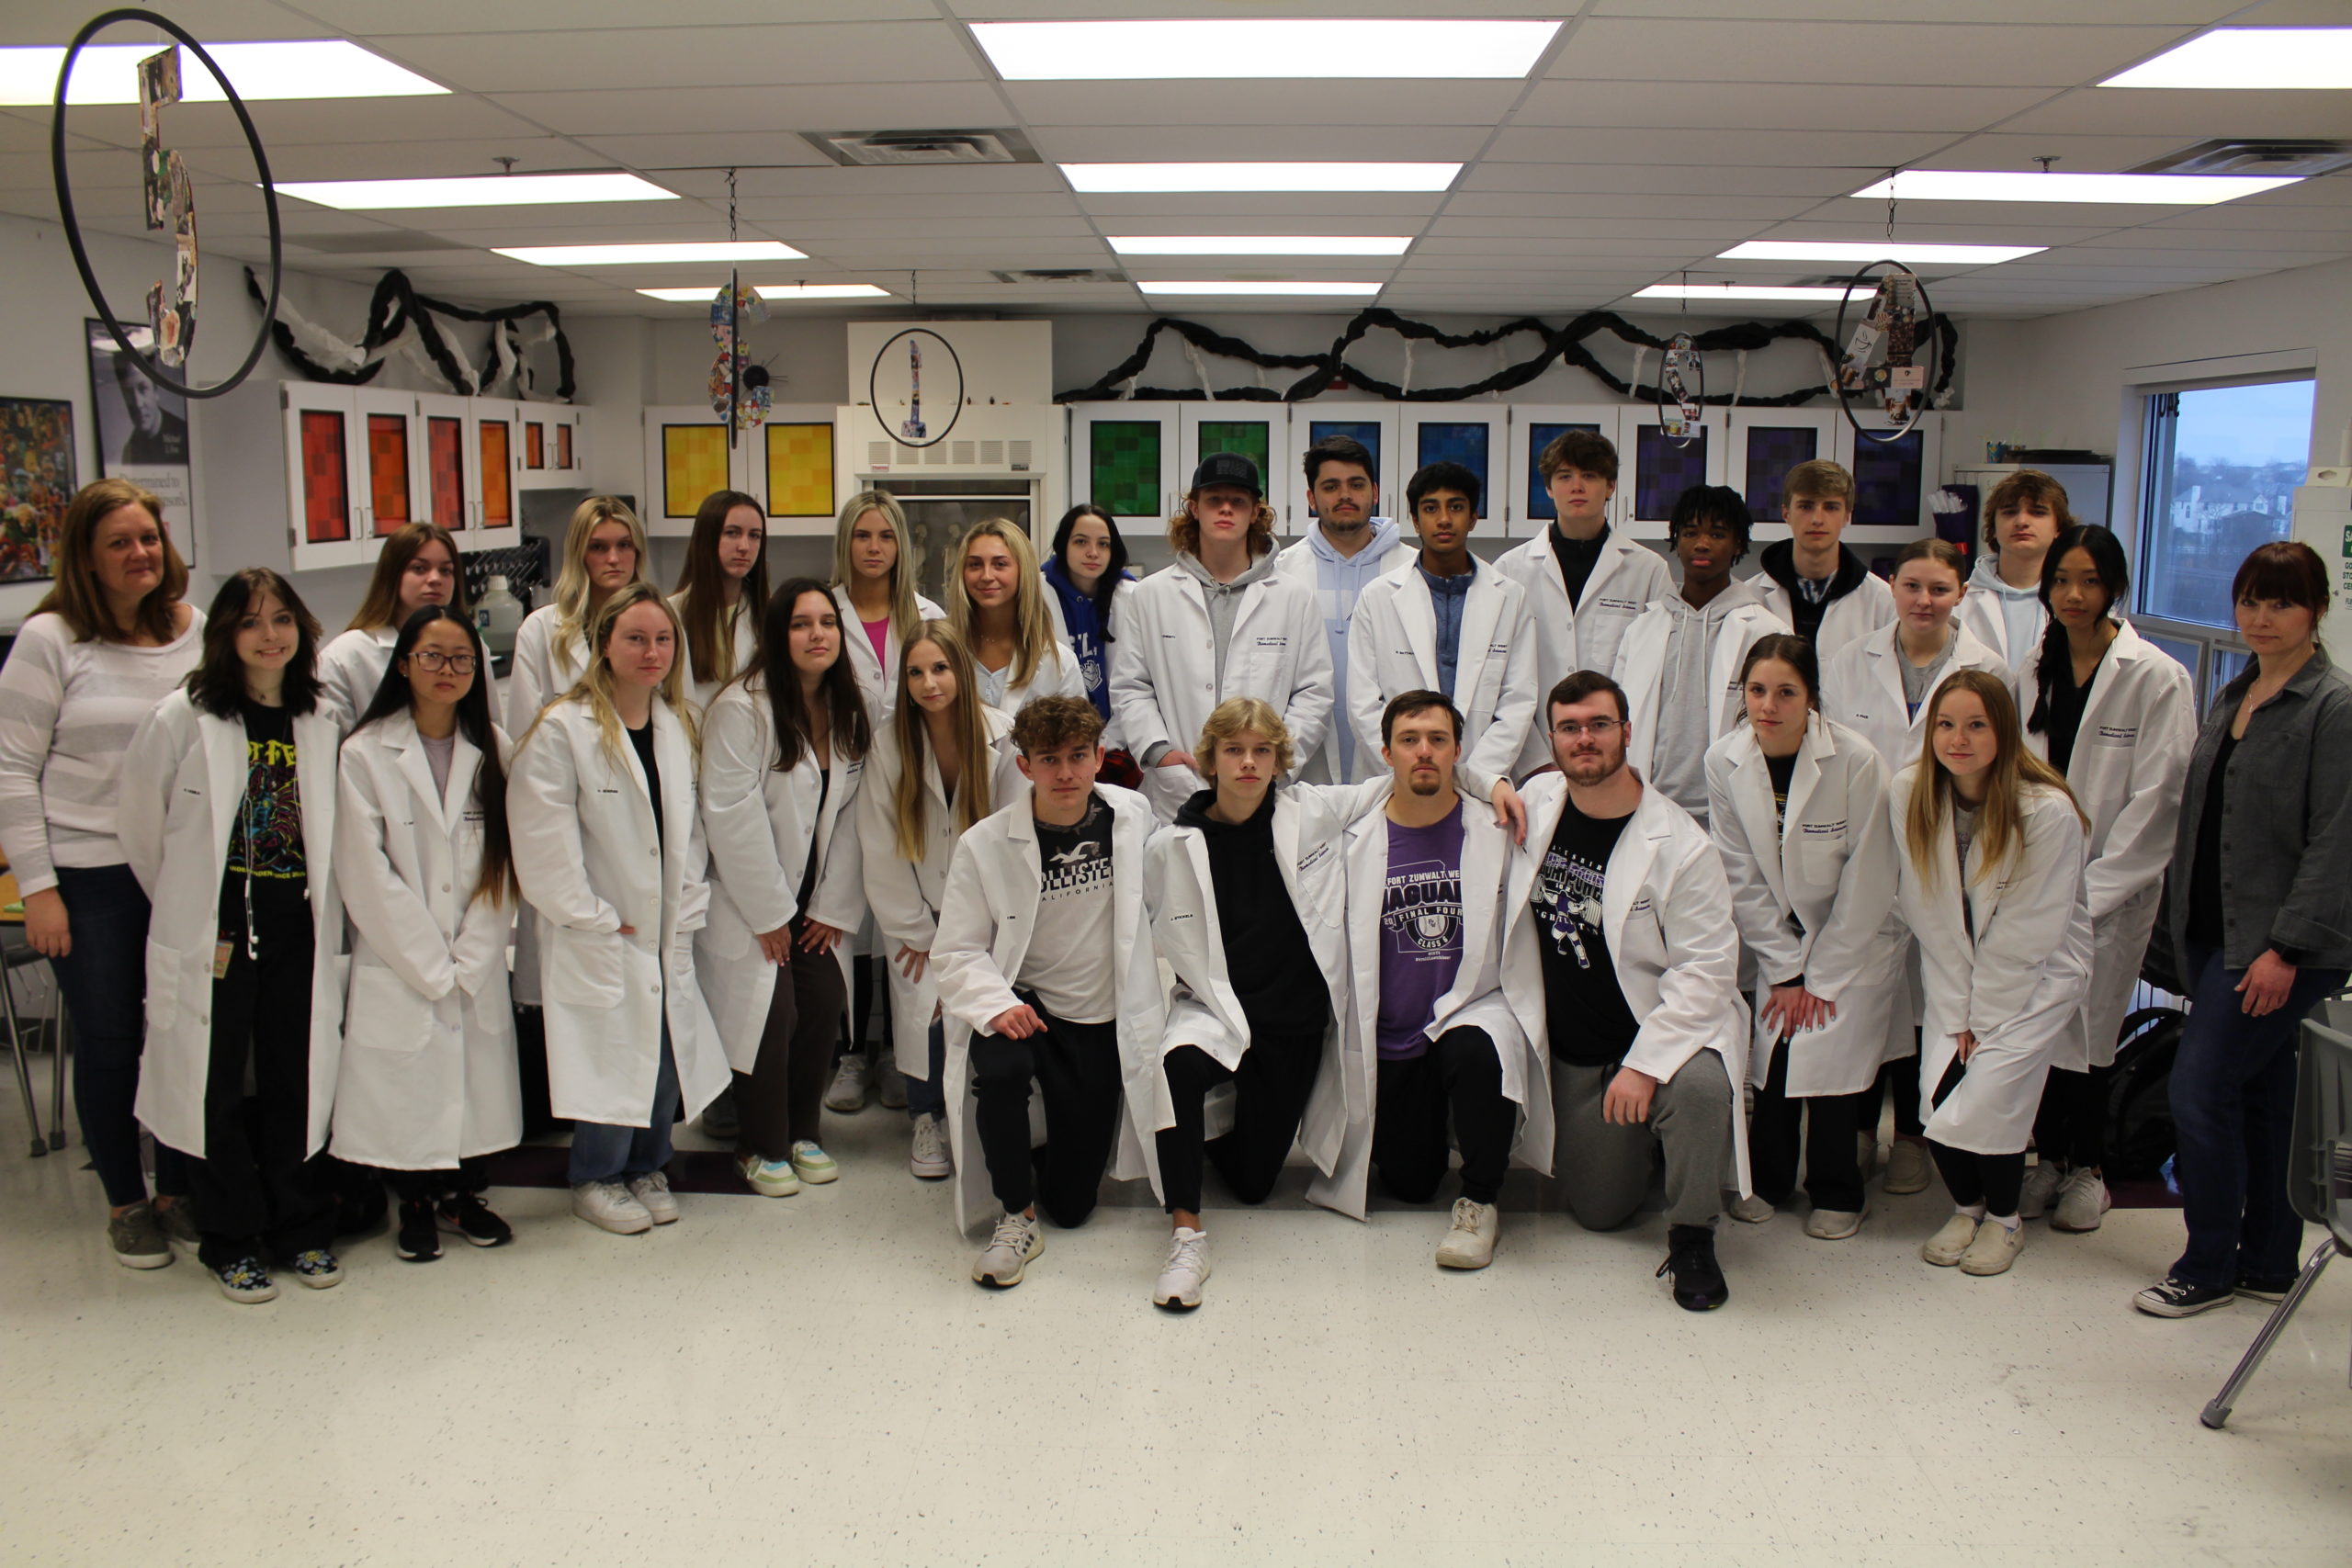 PLTW teachers, Marie Jackson and Justina Davitz pose for a photo with the seniors that received white coats.